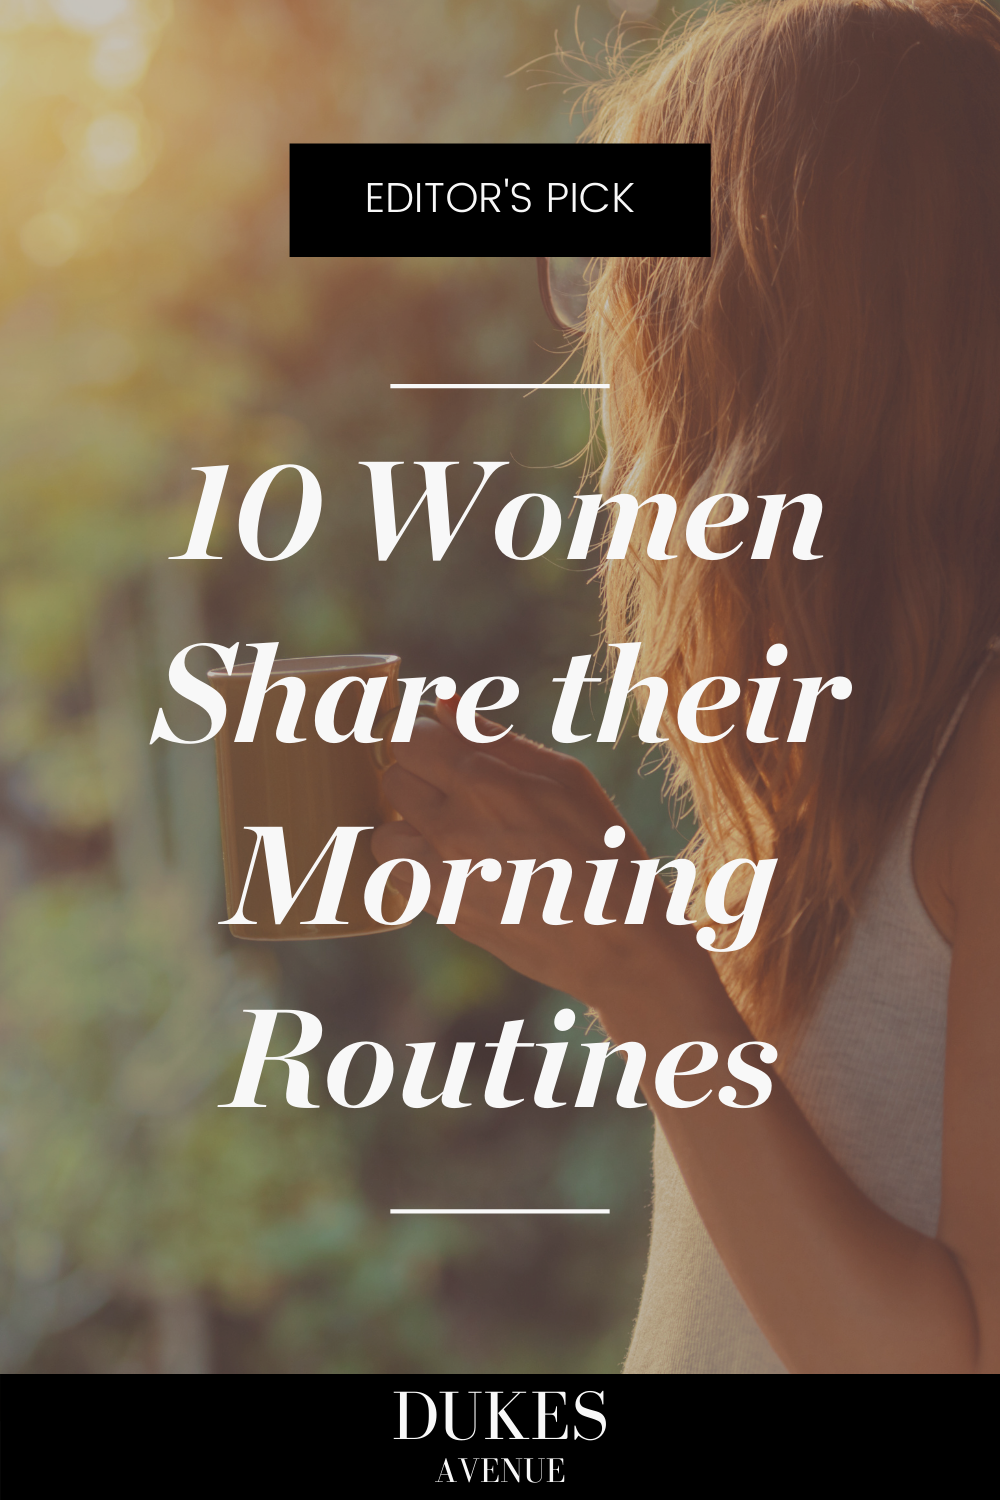 Woman holding mug of coffee with text overlay '10 Women Share Their Morning Routines'